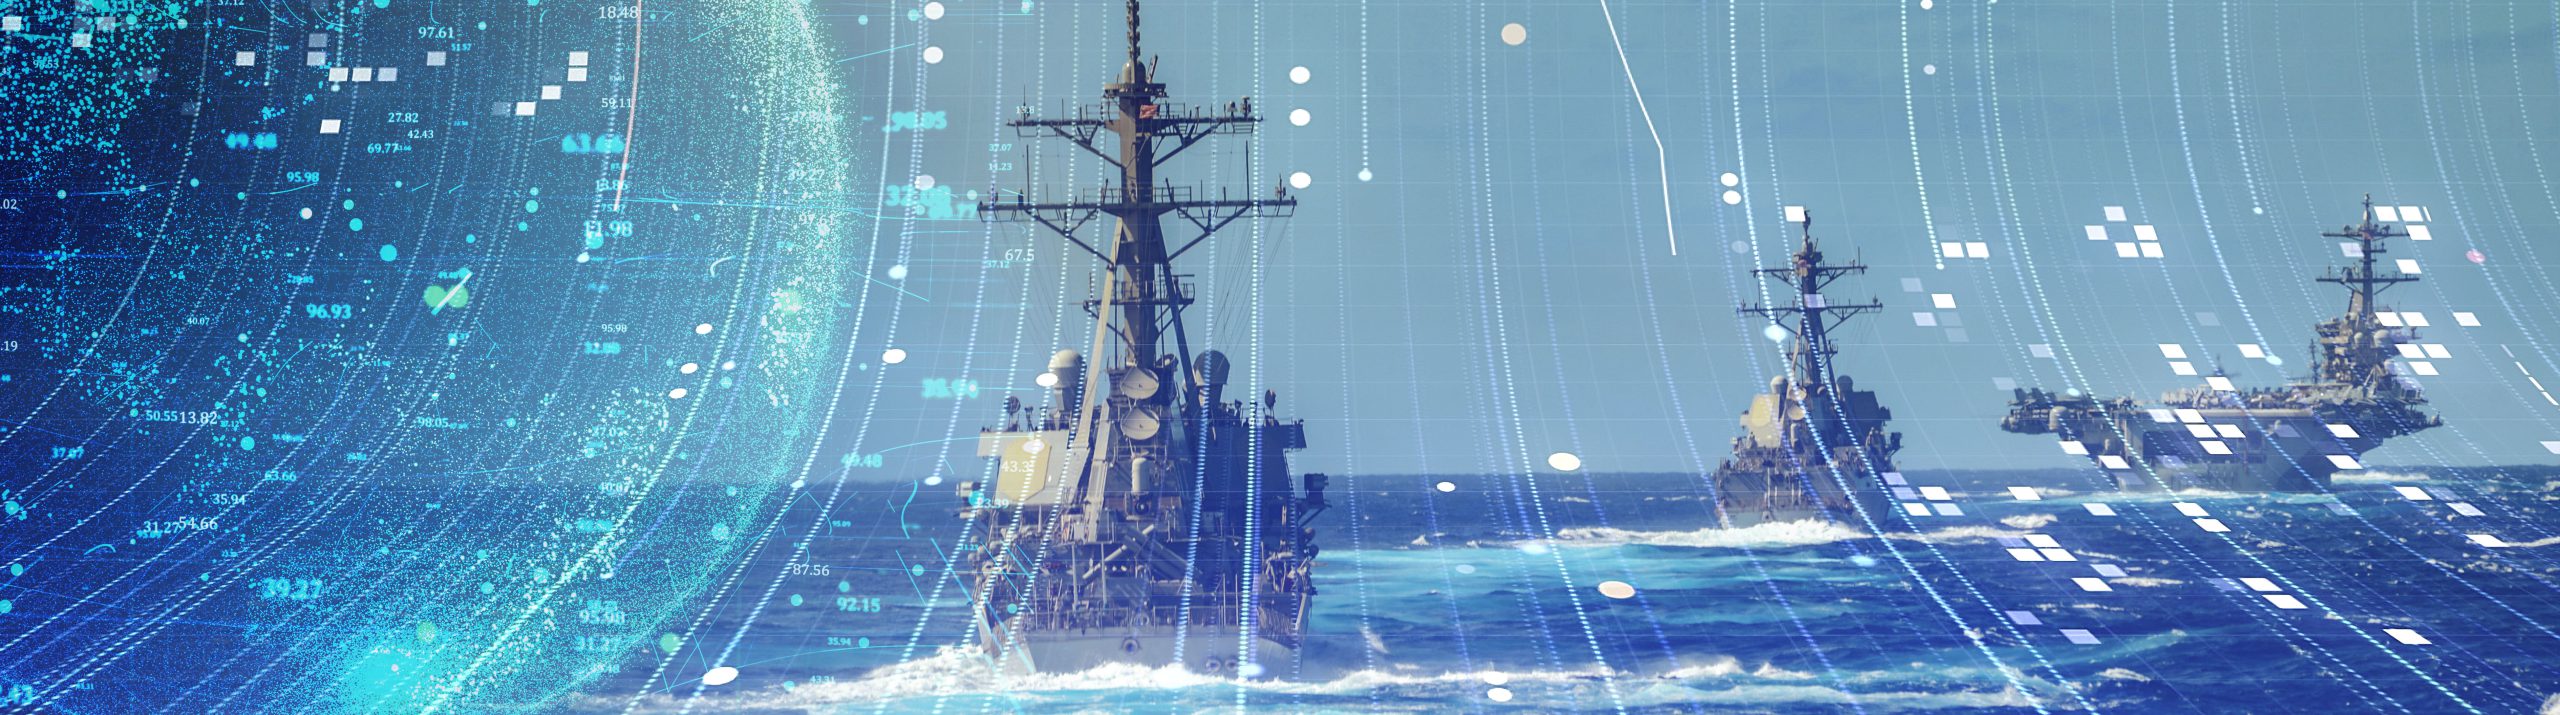 Navy strike force on the ocean, image is overlaid with abstract representation of a globe and data connection lines in hues of aqua and white